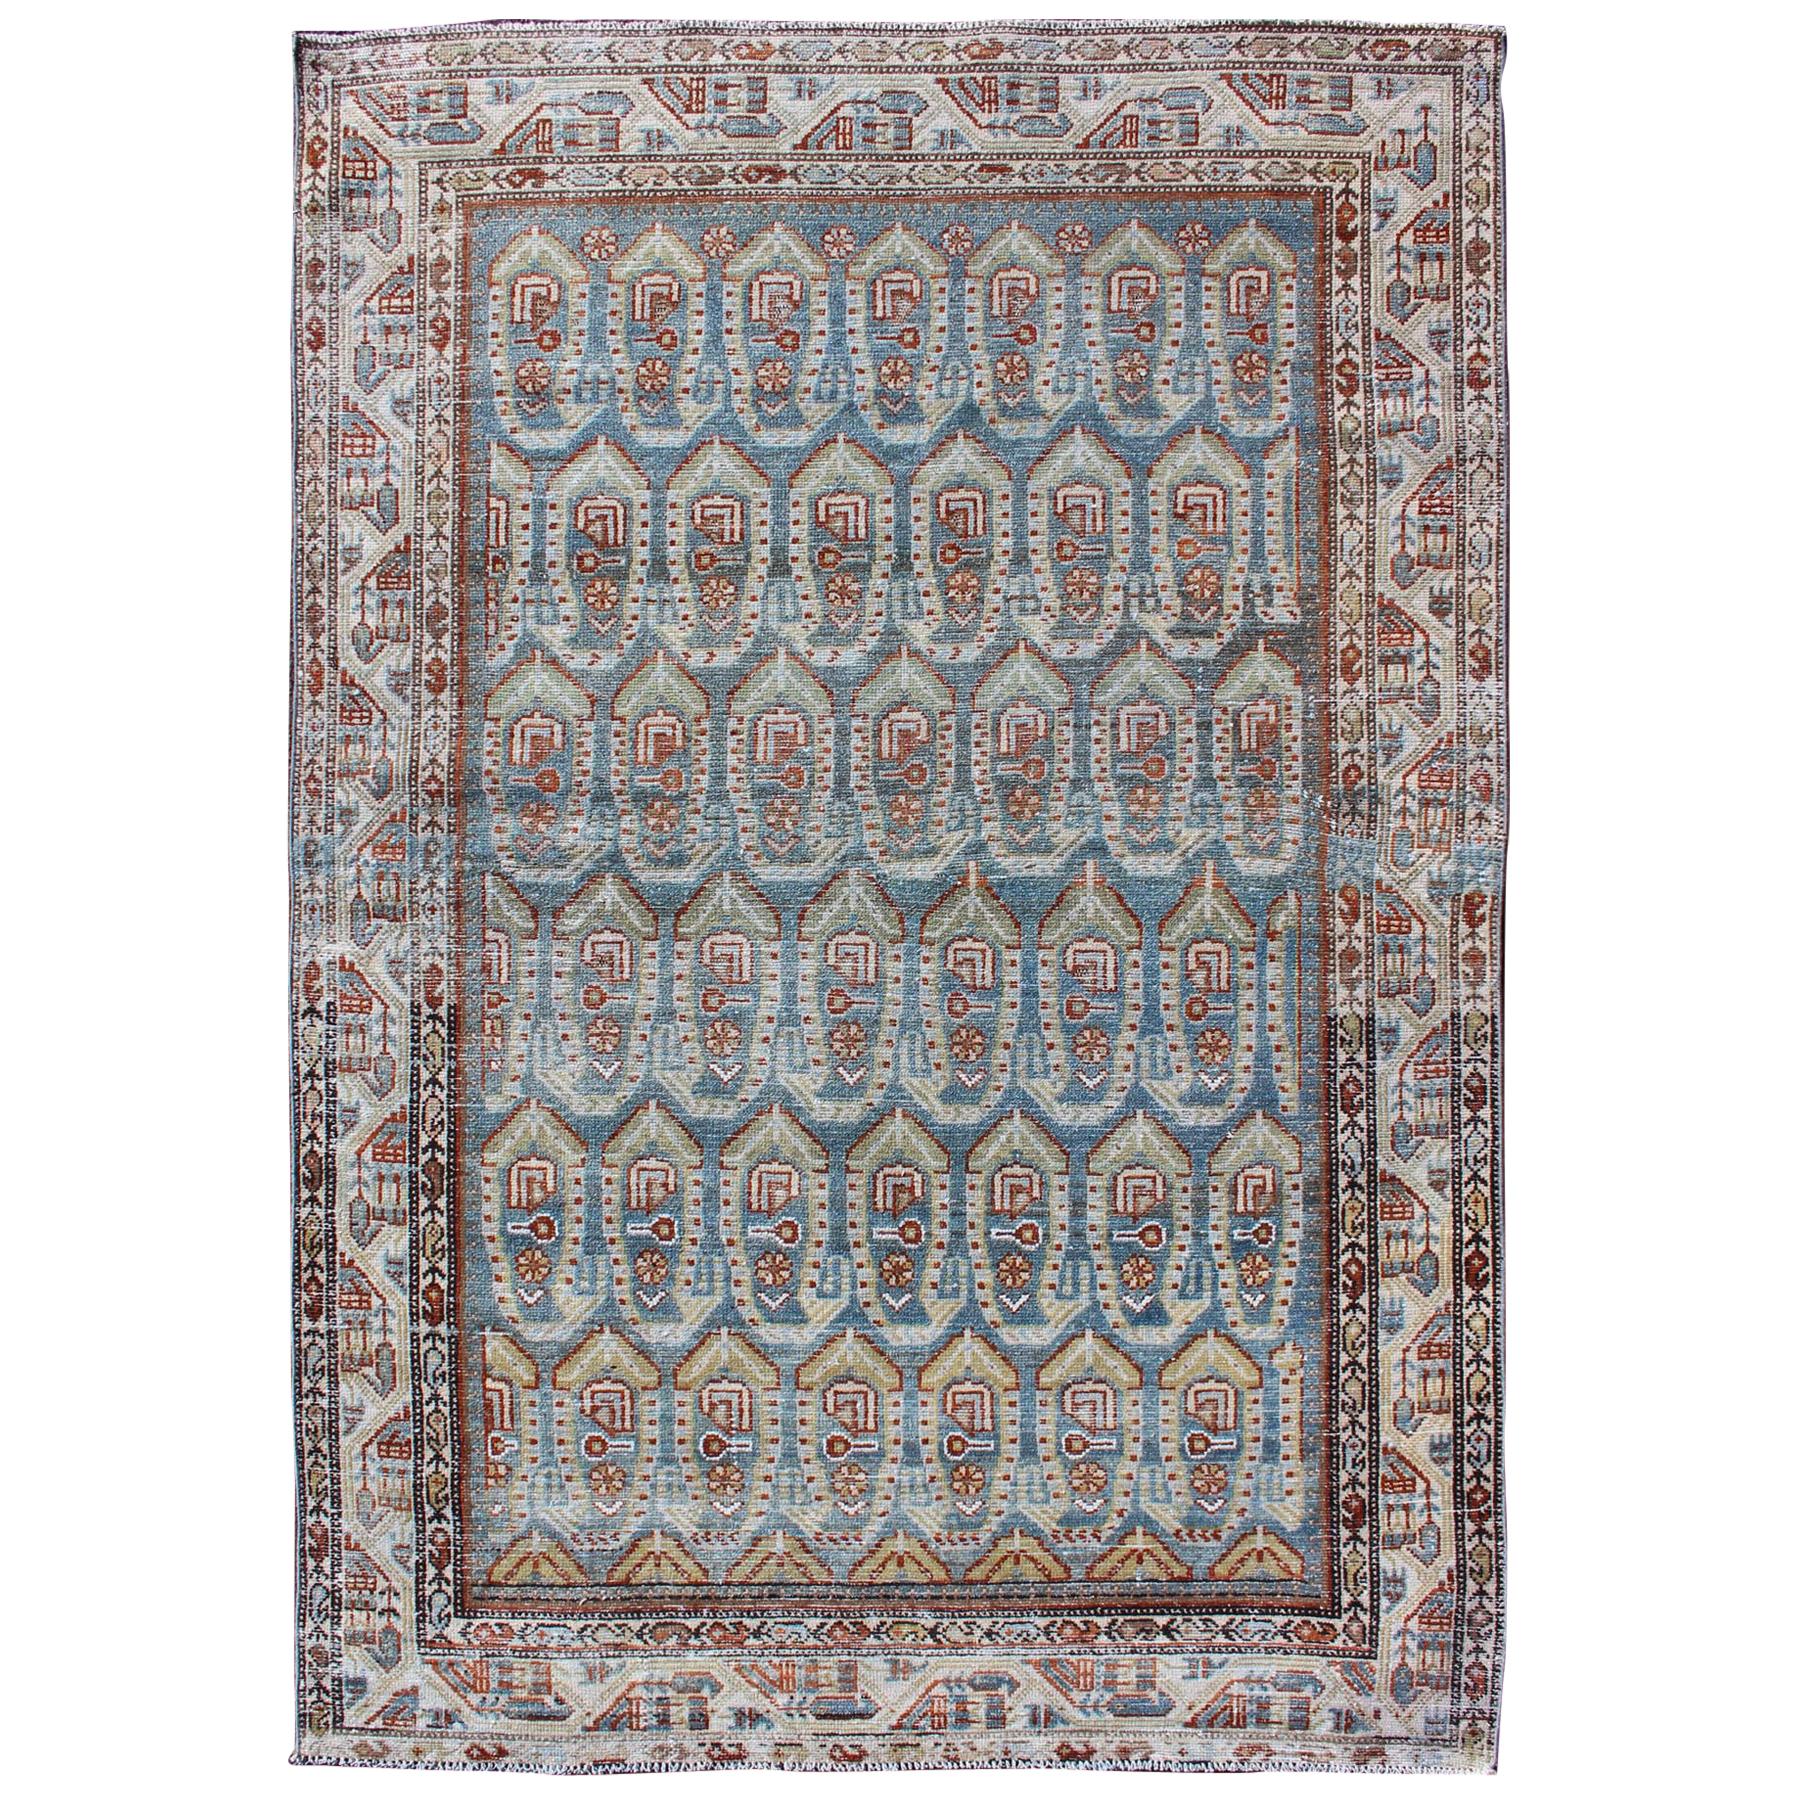 All-Over Paisley Pattern Antique Persian Malayer Rug in Blue and Red